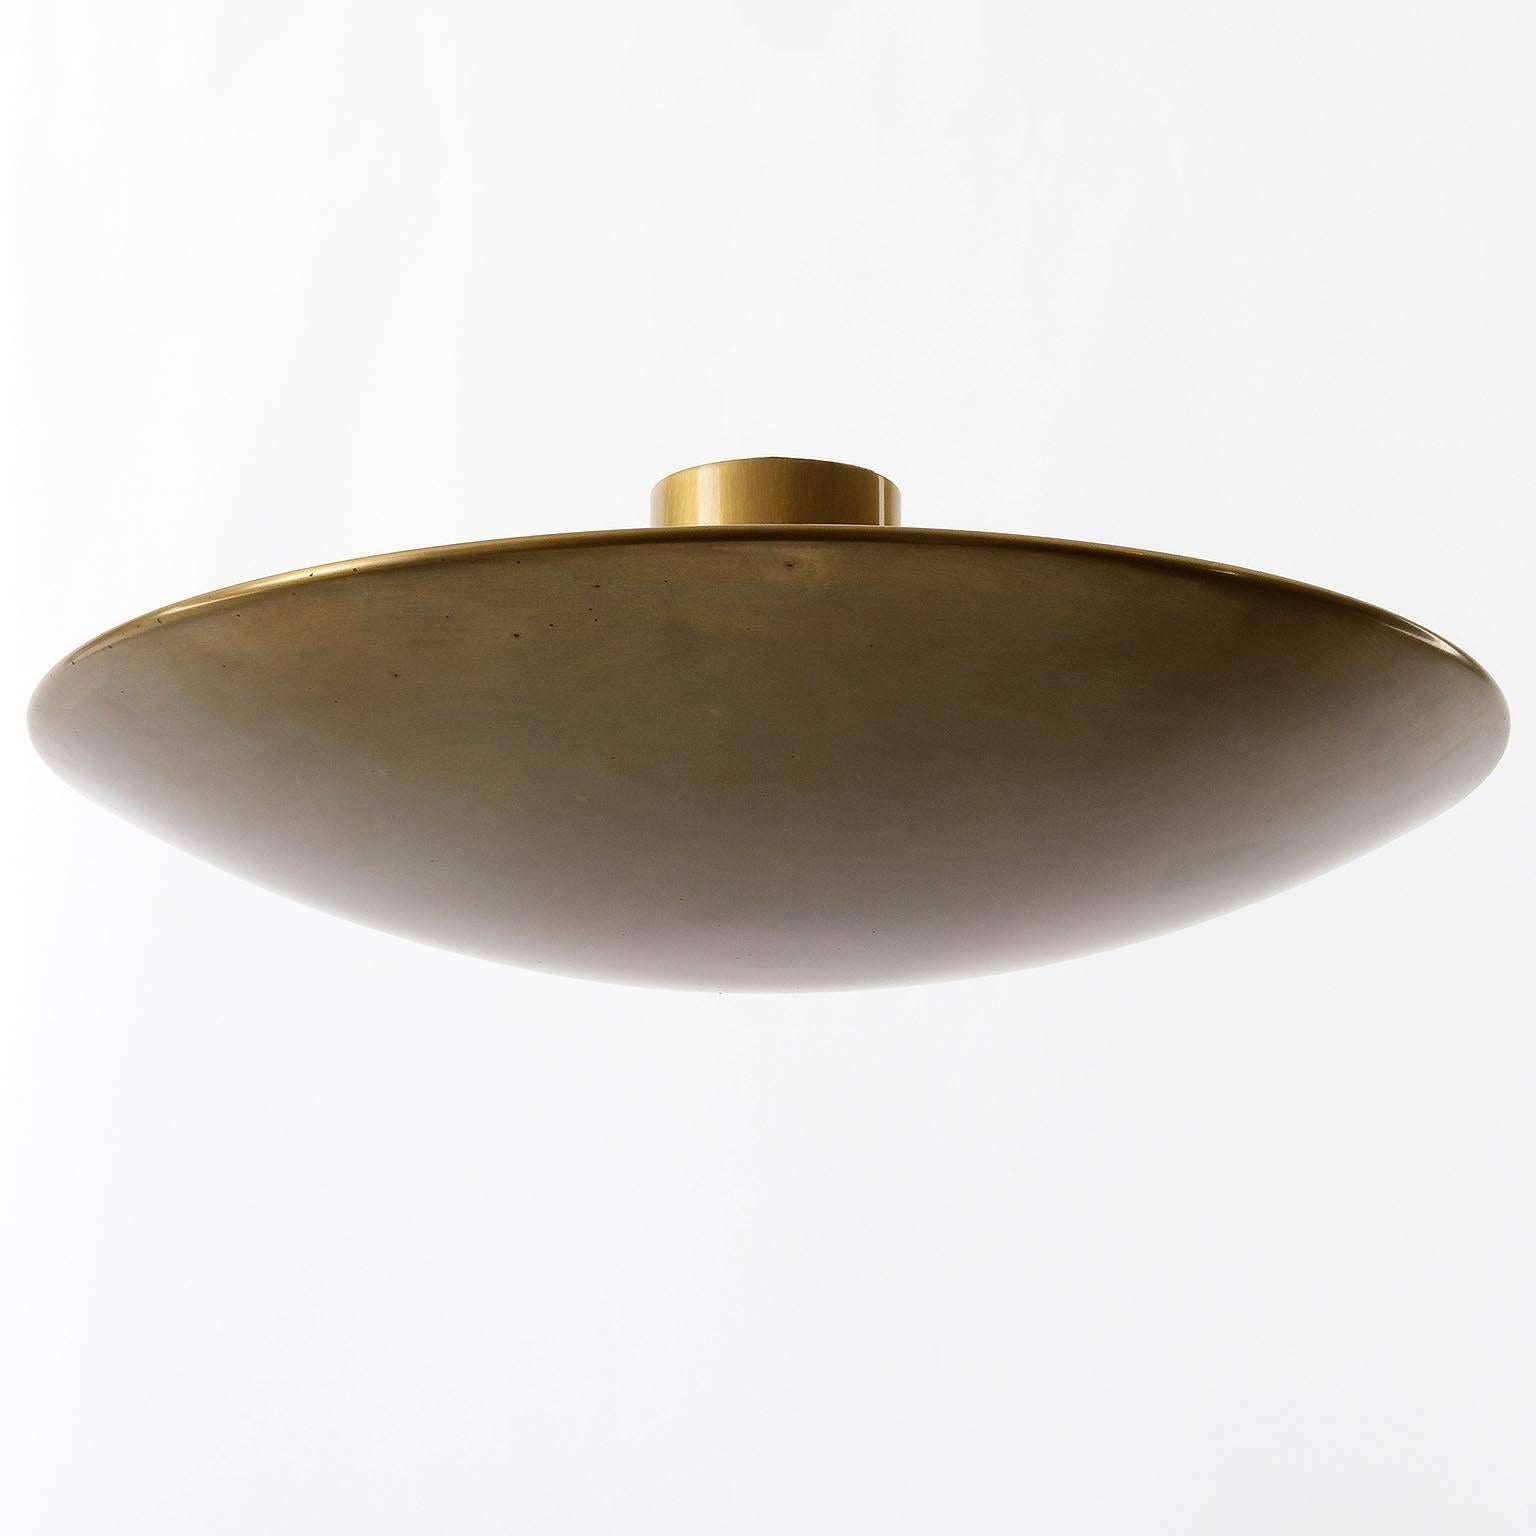 An uplight bowl ceiling light fixture by Florian Schulz, Germany, manufactured in Mid-Century, circa 1970 (late 1960s - 1970s). The lamp is made of patinated solid brass in a tarnished finish. It takes five small Edison base bulbs.

The same but